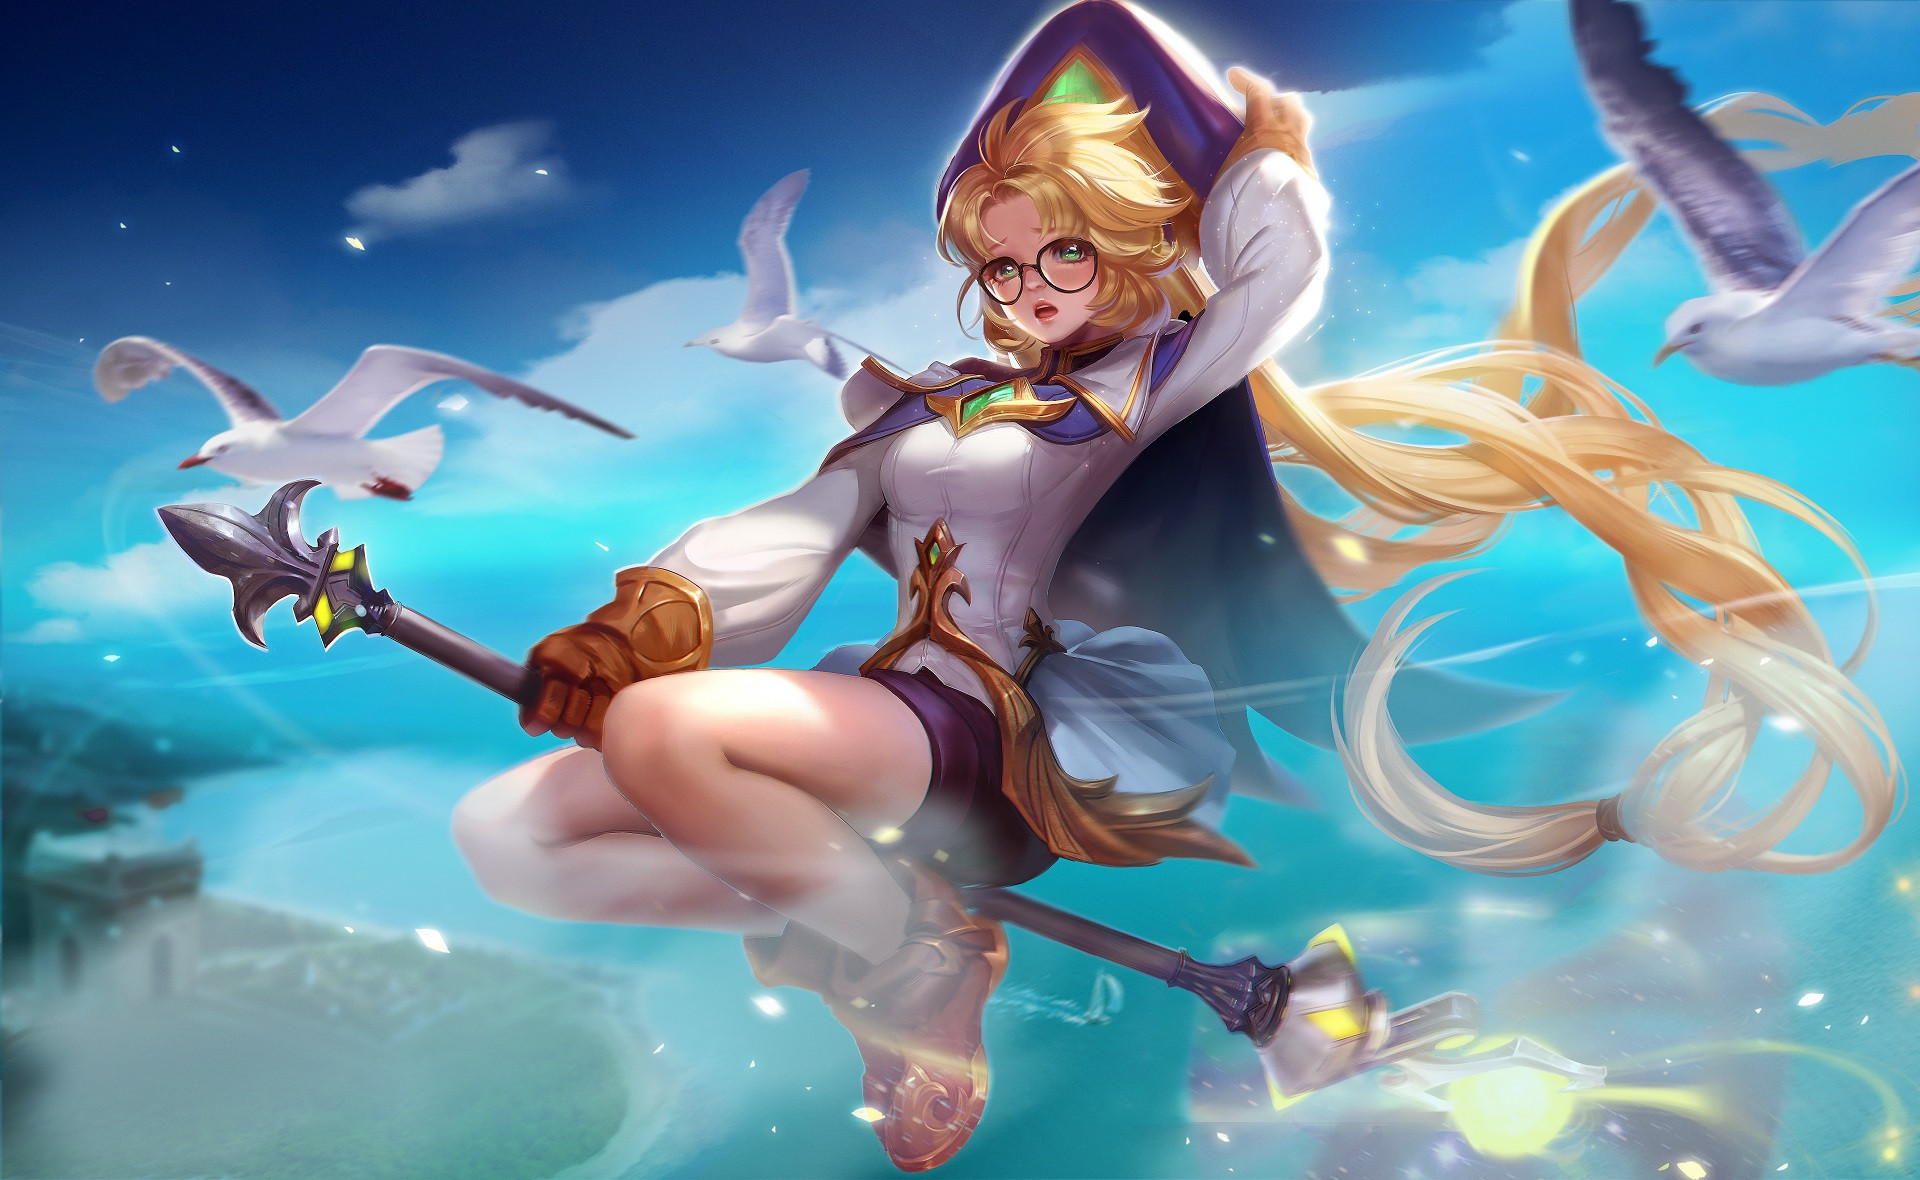 Anime 1920x1180 Arena of Valor video games video game art video game girls video game characters glasses birds